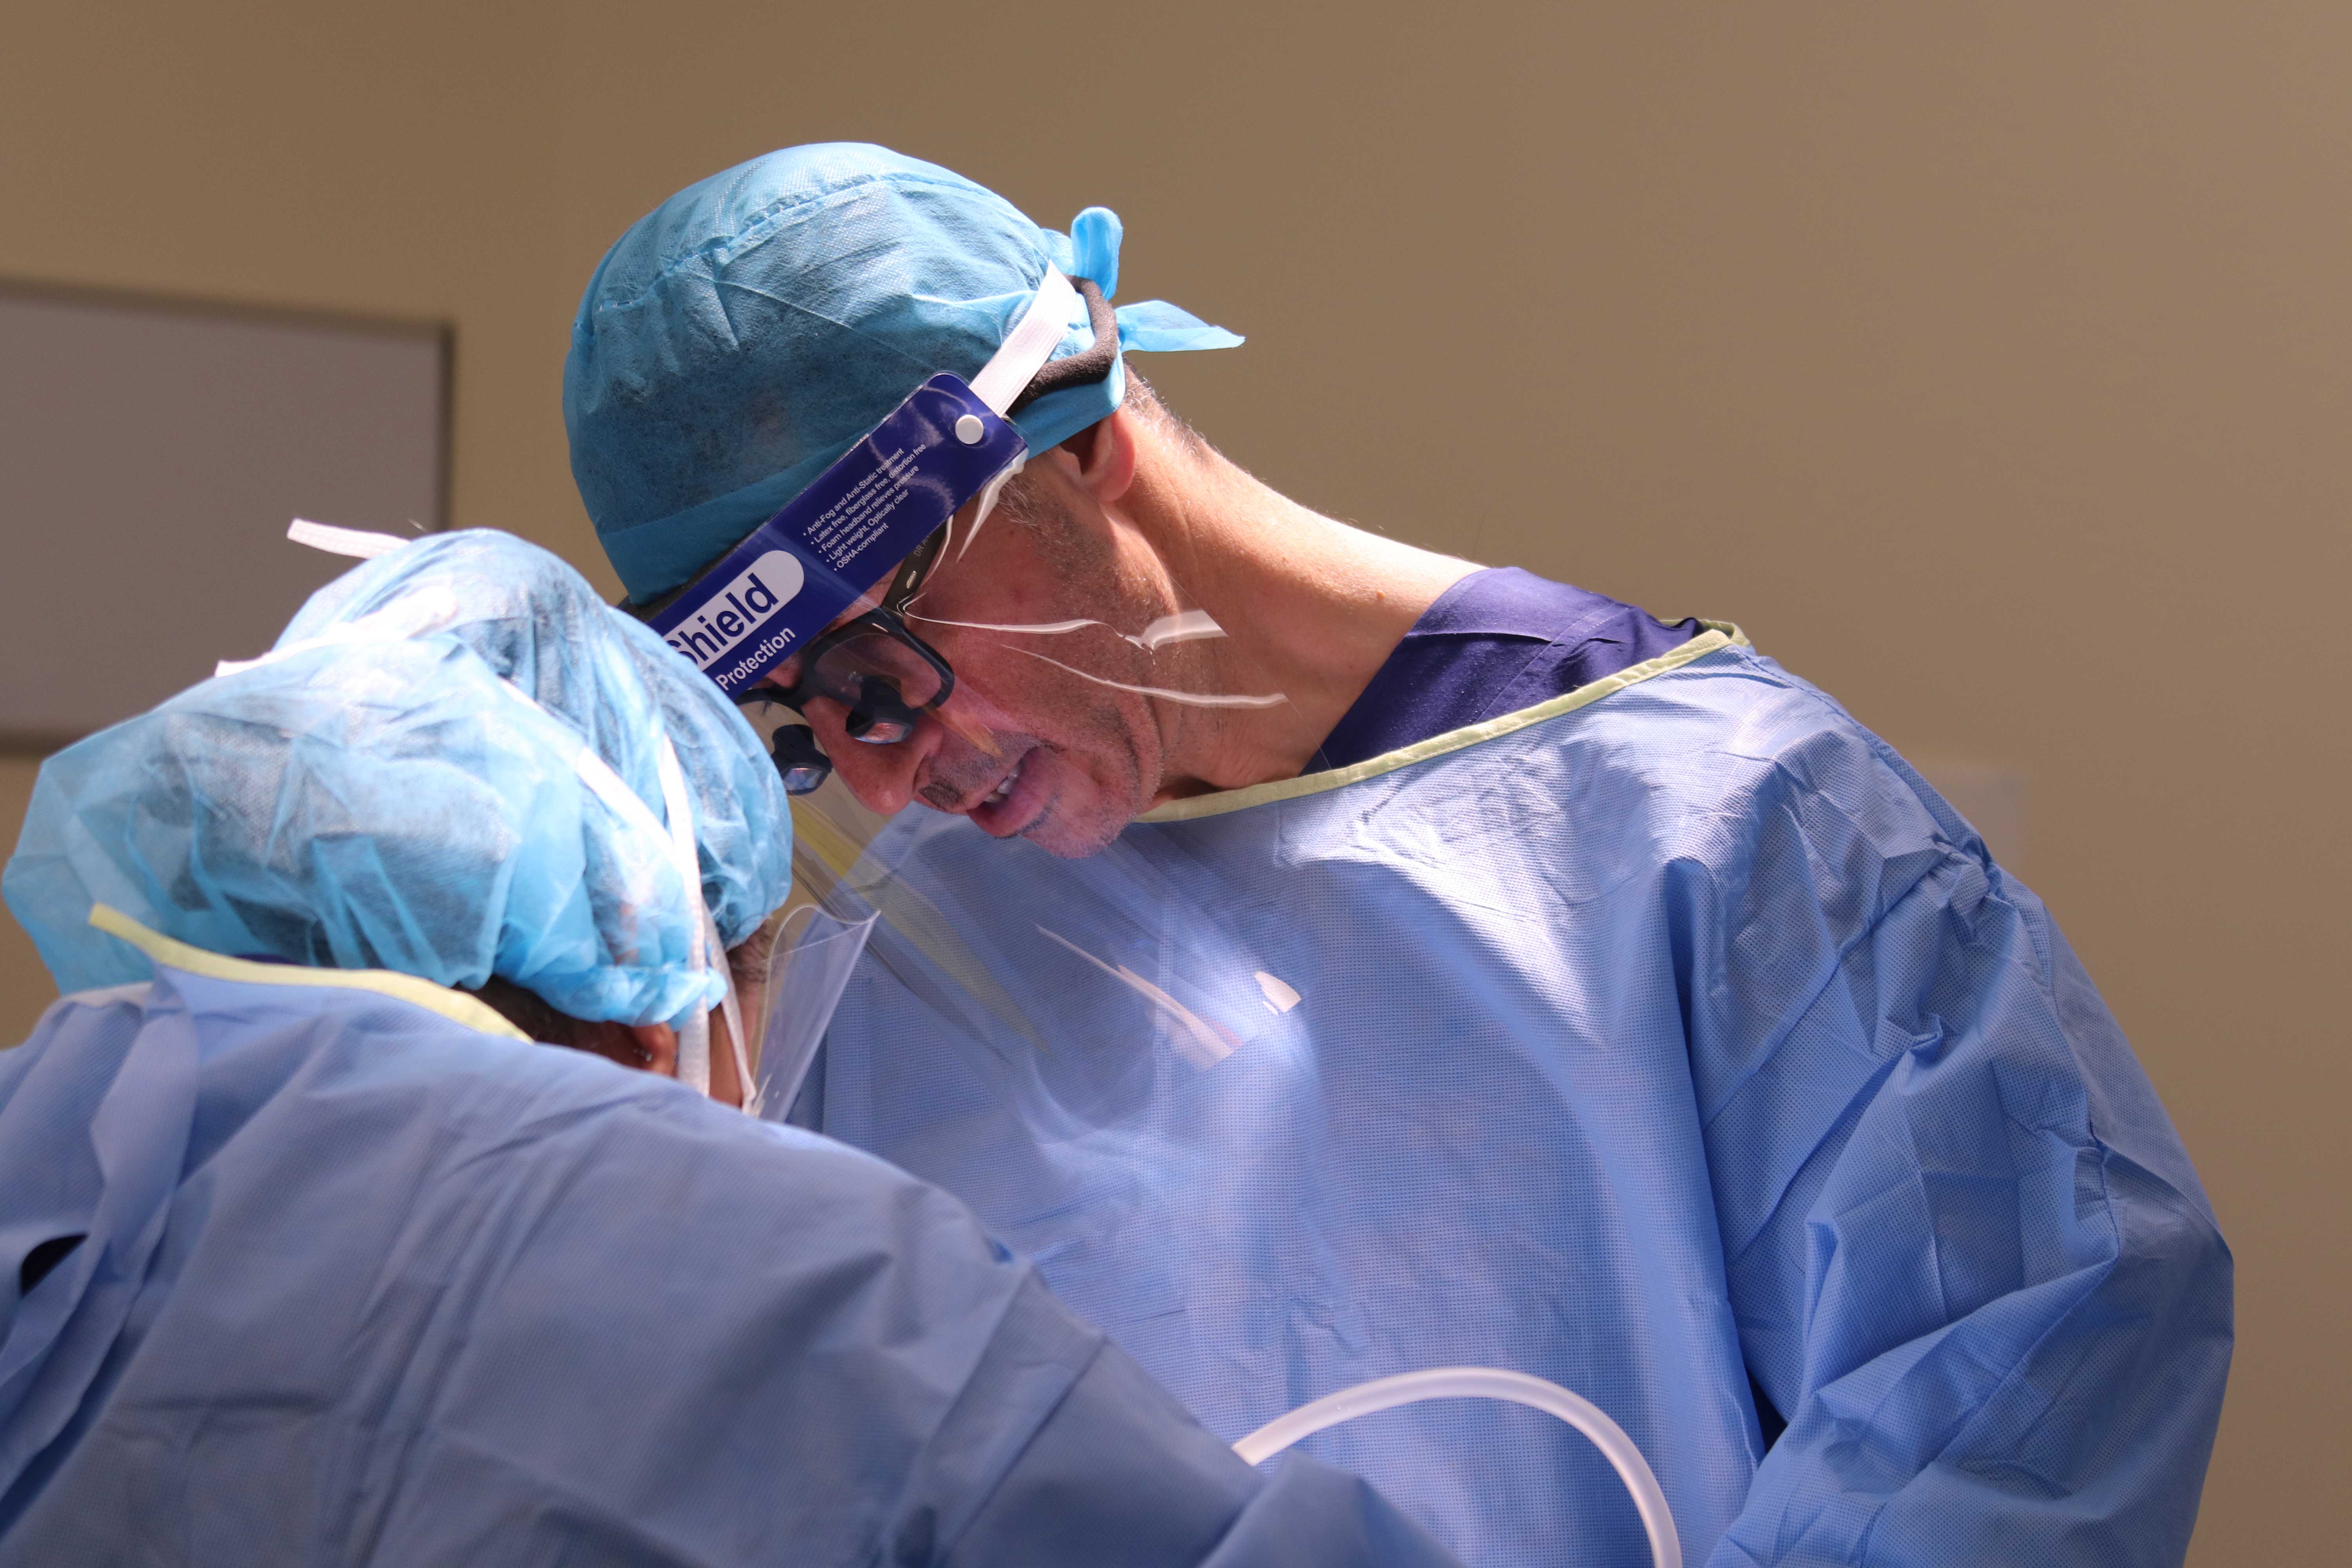 Dr Anthony Maloof performing Mohs surgery in Sydney. Dr Maloof is performing the second stage or the Mohs reconstructive surgery to restore a normal appearance.